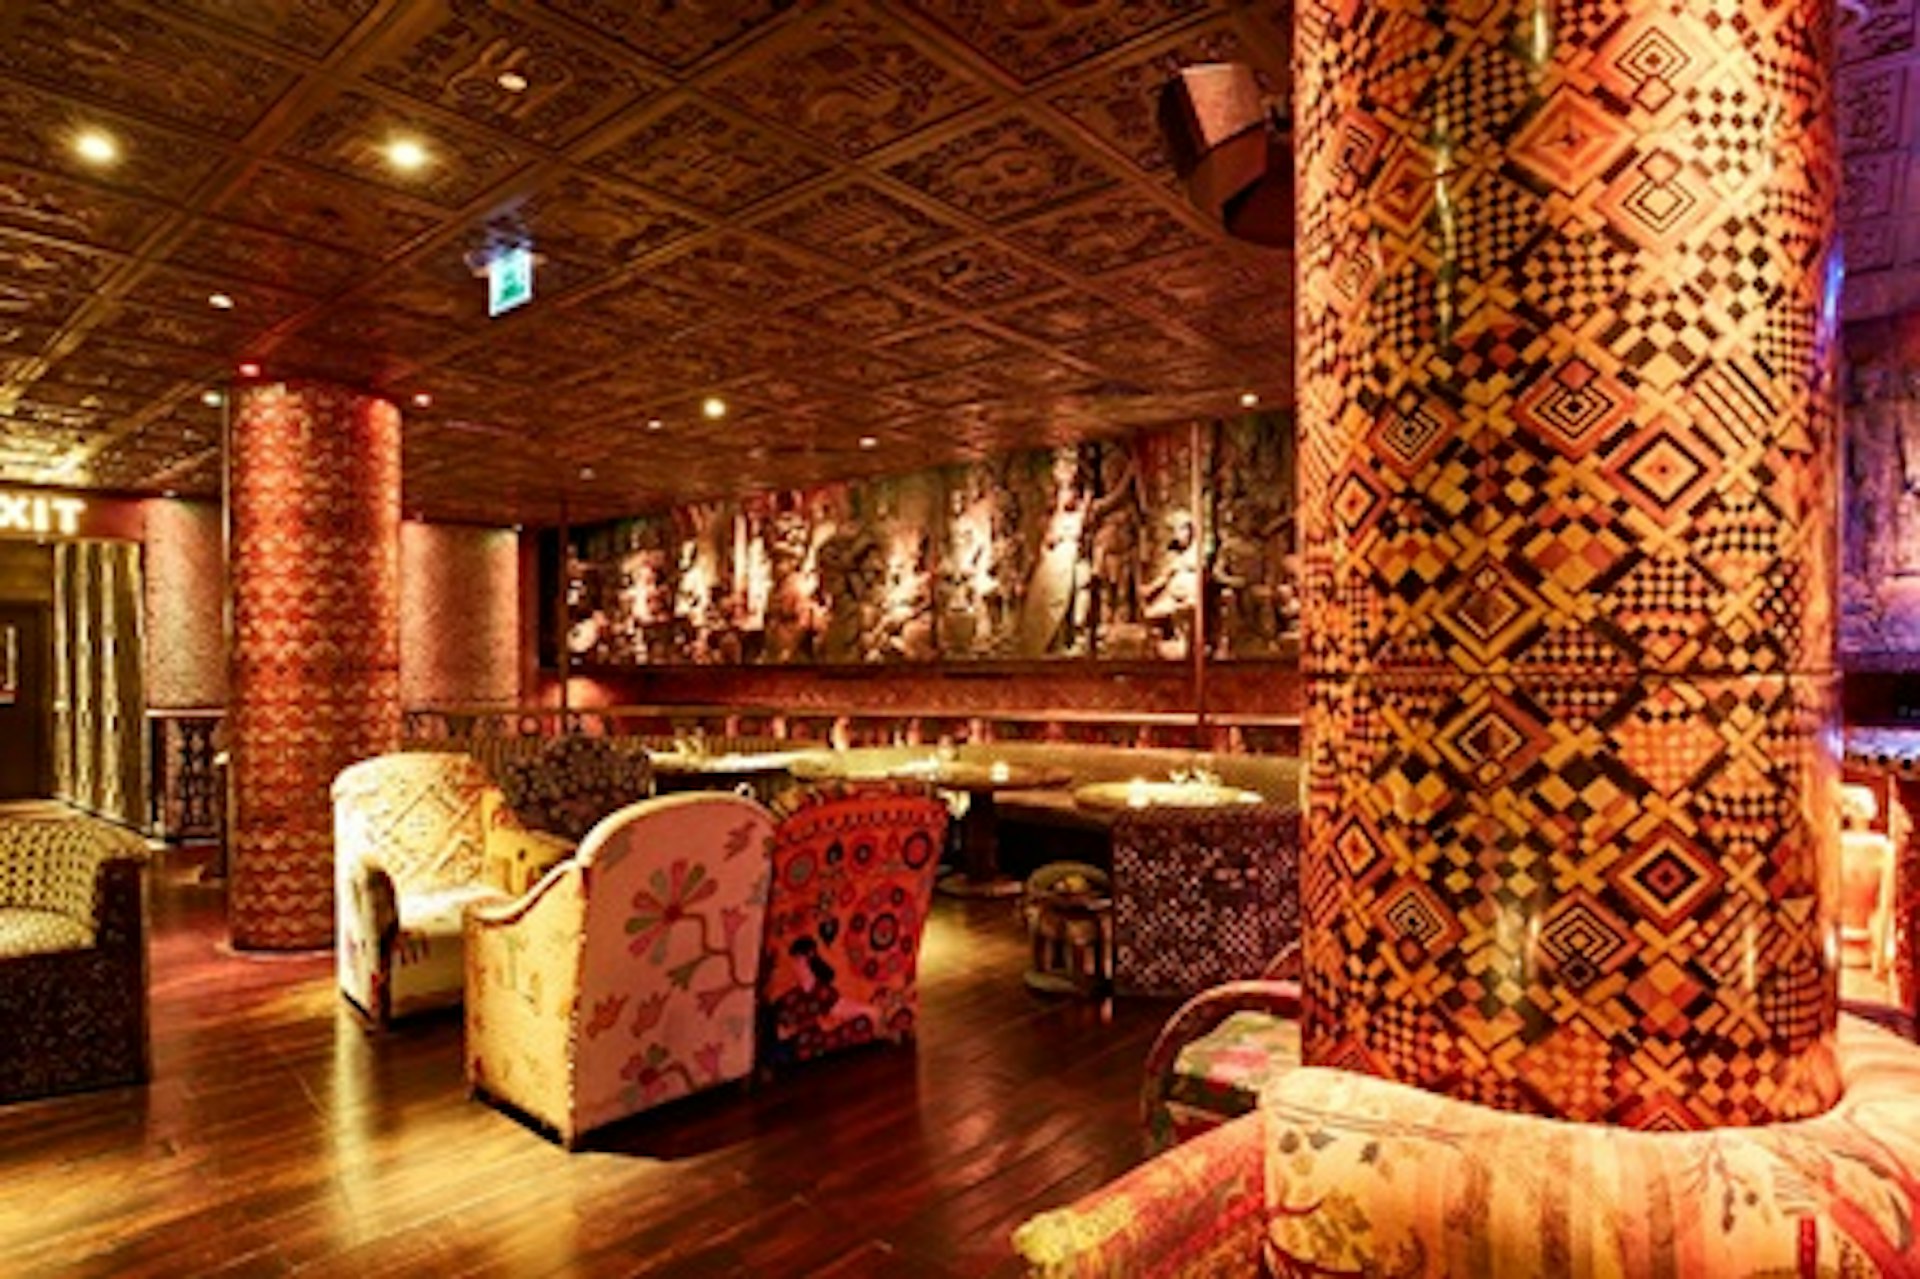 Burger, Fries and Cocktail for Two at London's Shaka Zulu 3